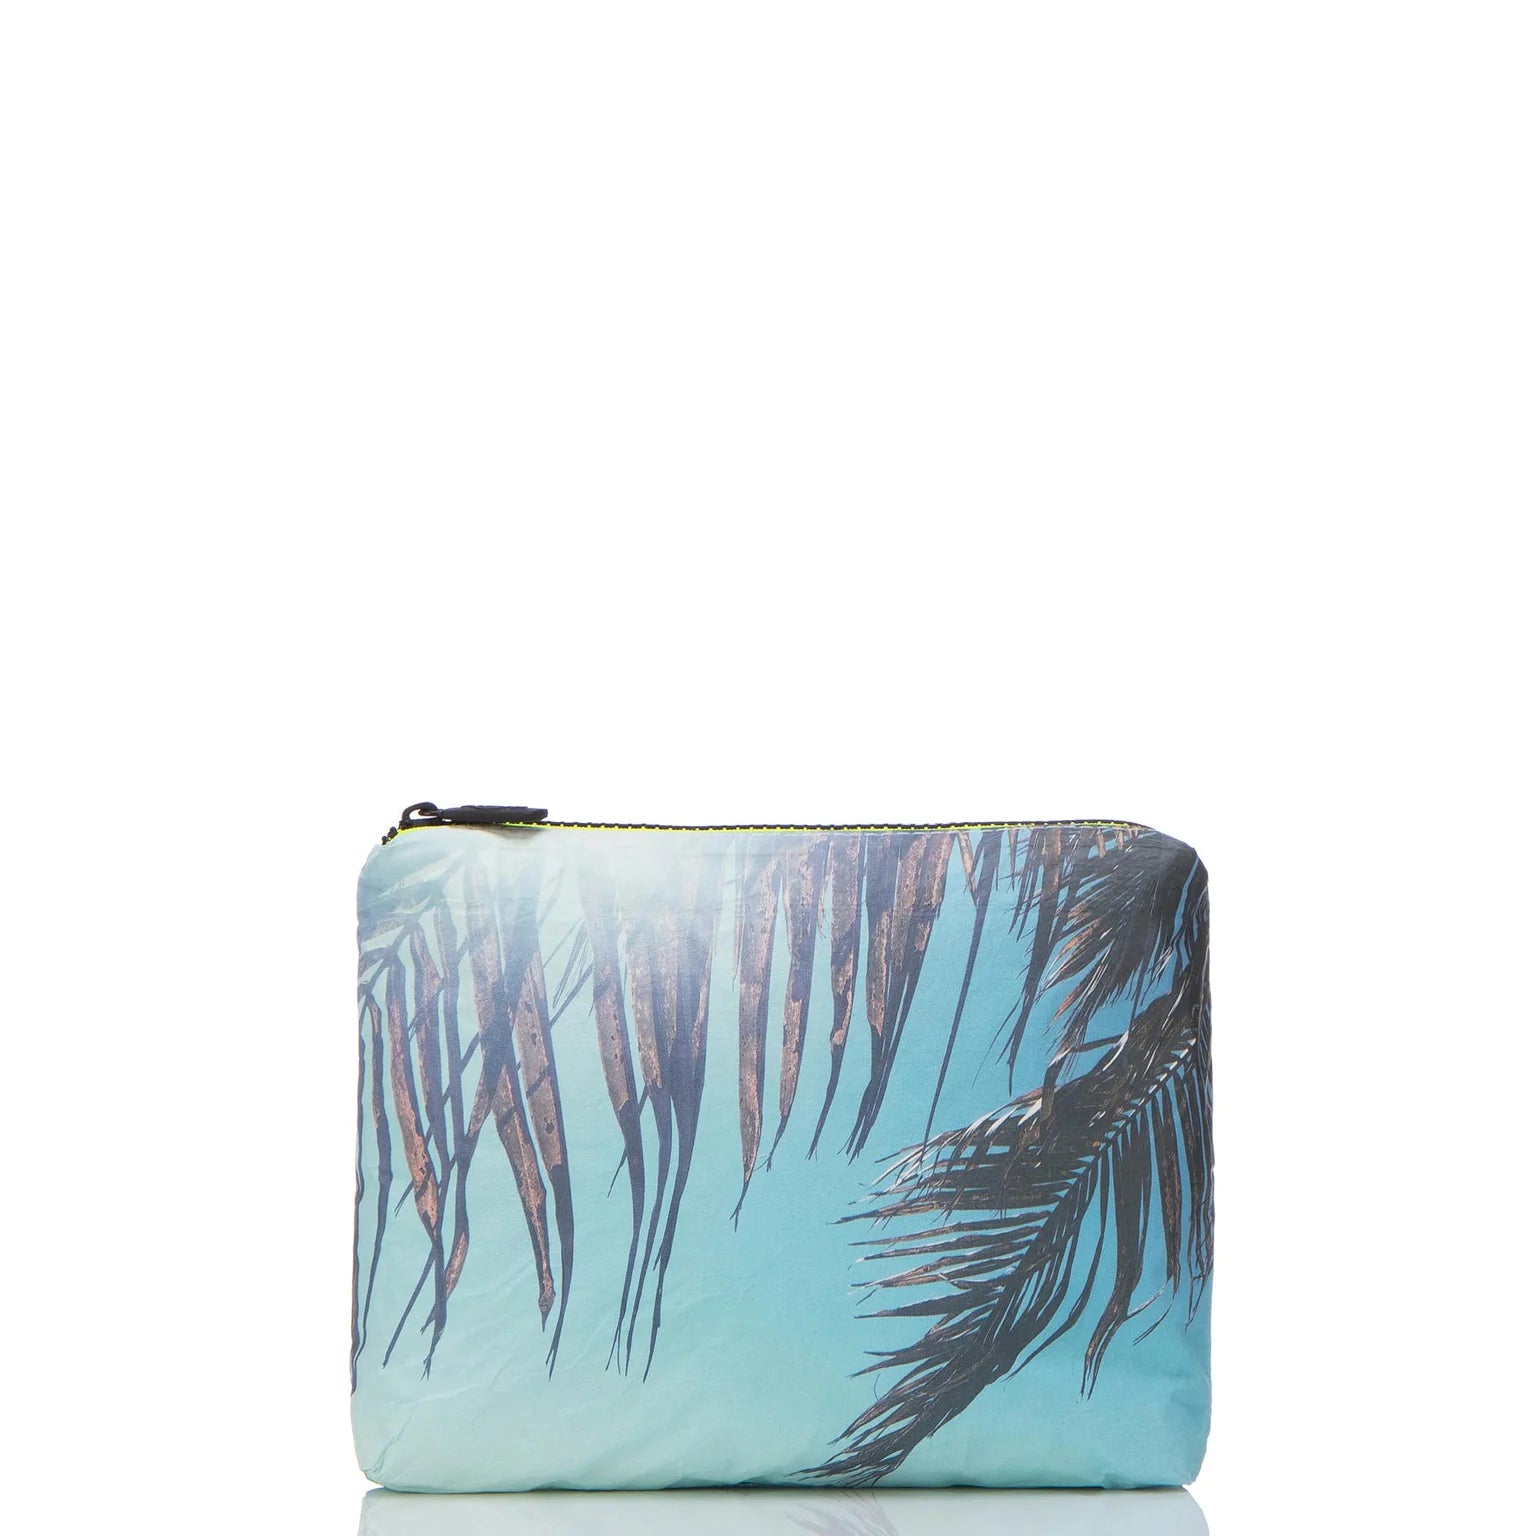 Tulum by Samudra - Small Pouch